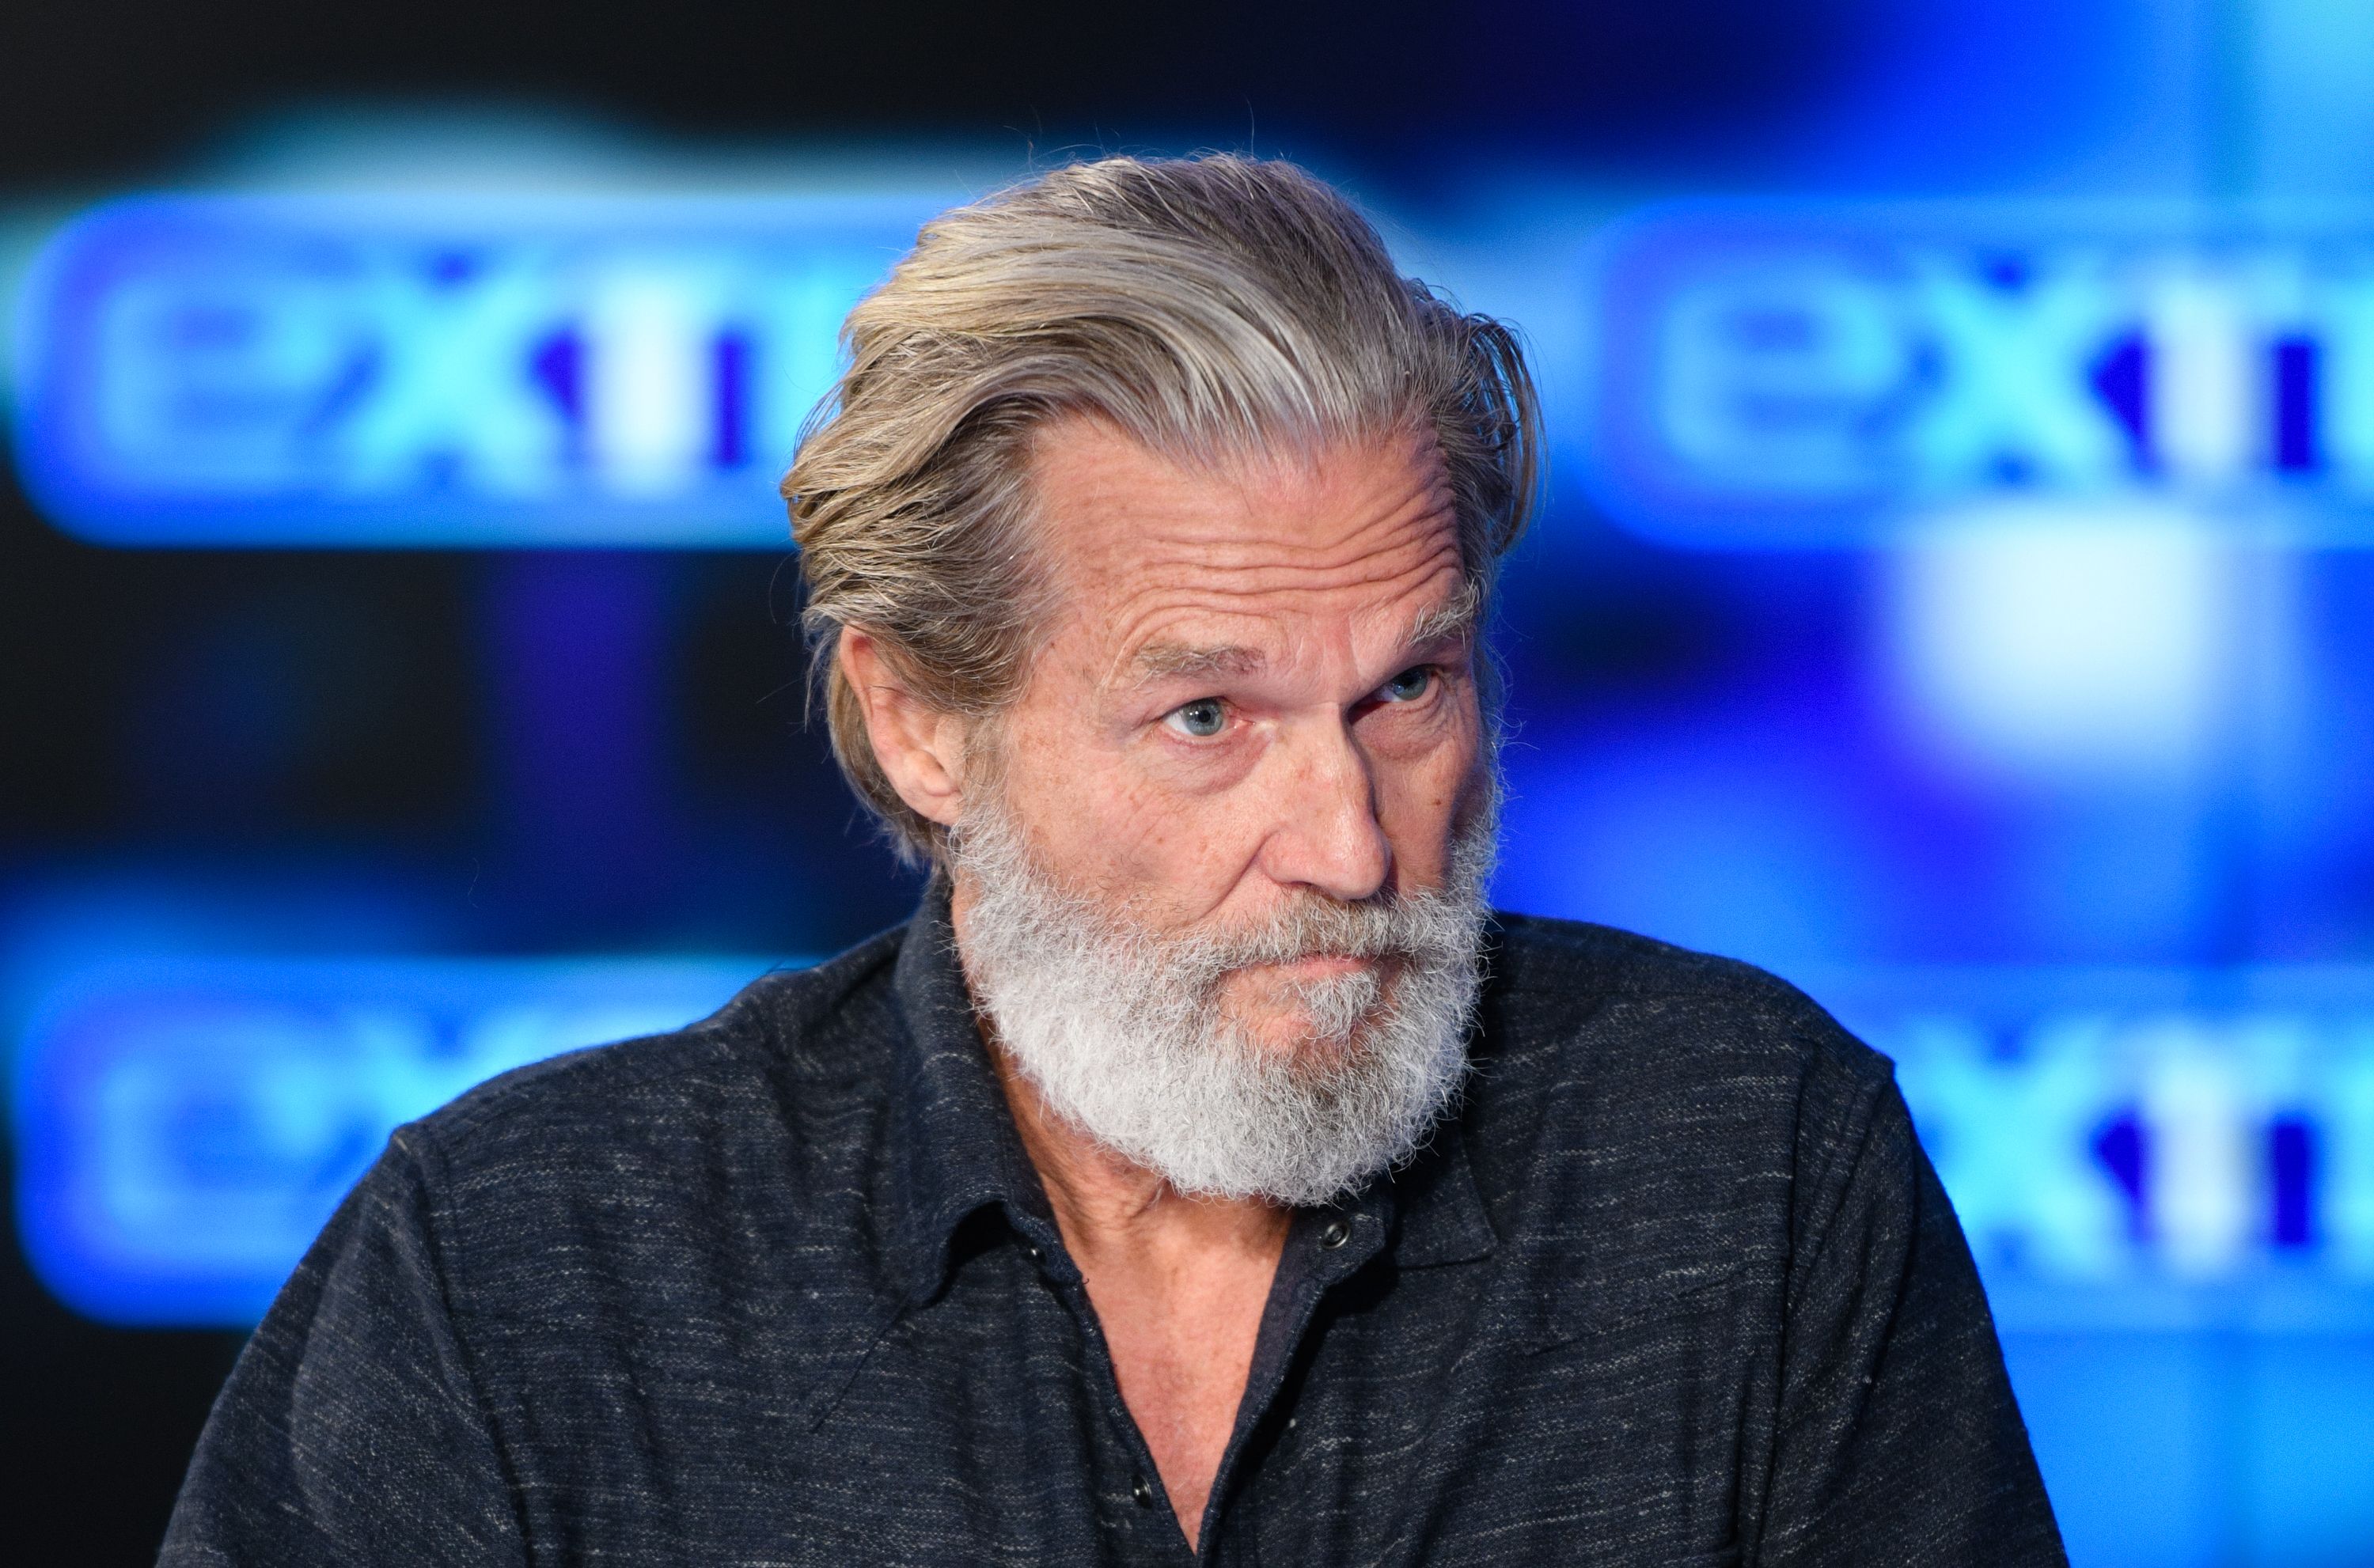  Jeff Bridges at "Extra" at Burbank Studios on December 13, 2019. | Photo: Getty Images